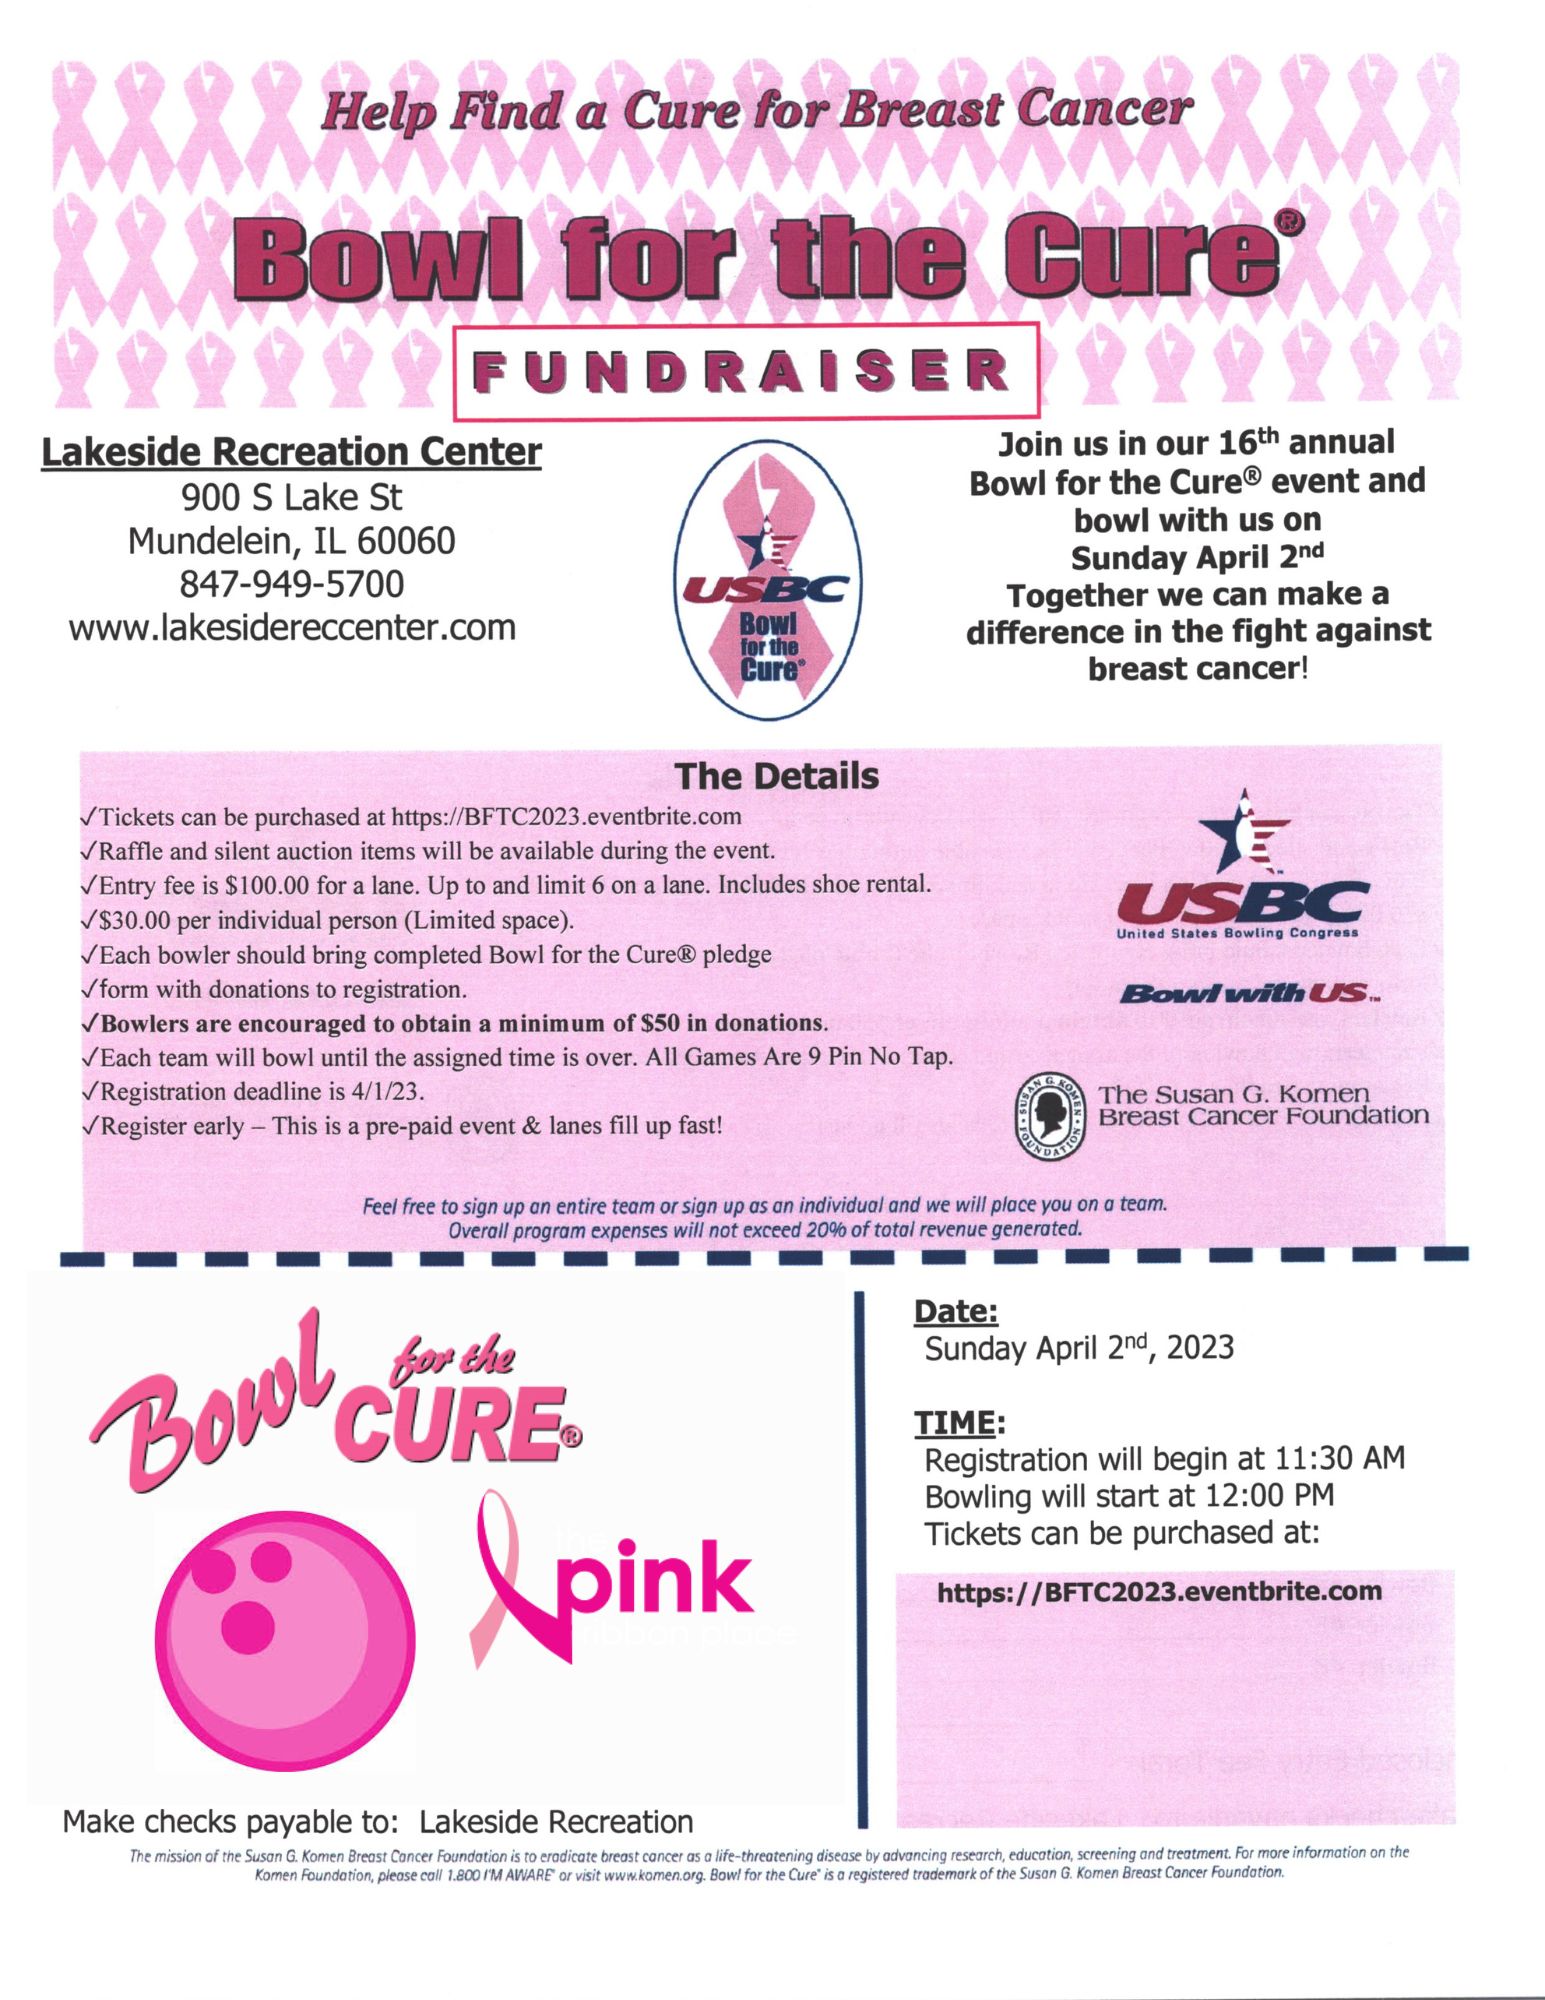 Bowl for the Cure Breast Cancer Fundraiser at Lakeside Recreation Center